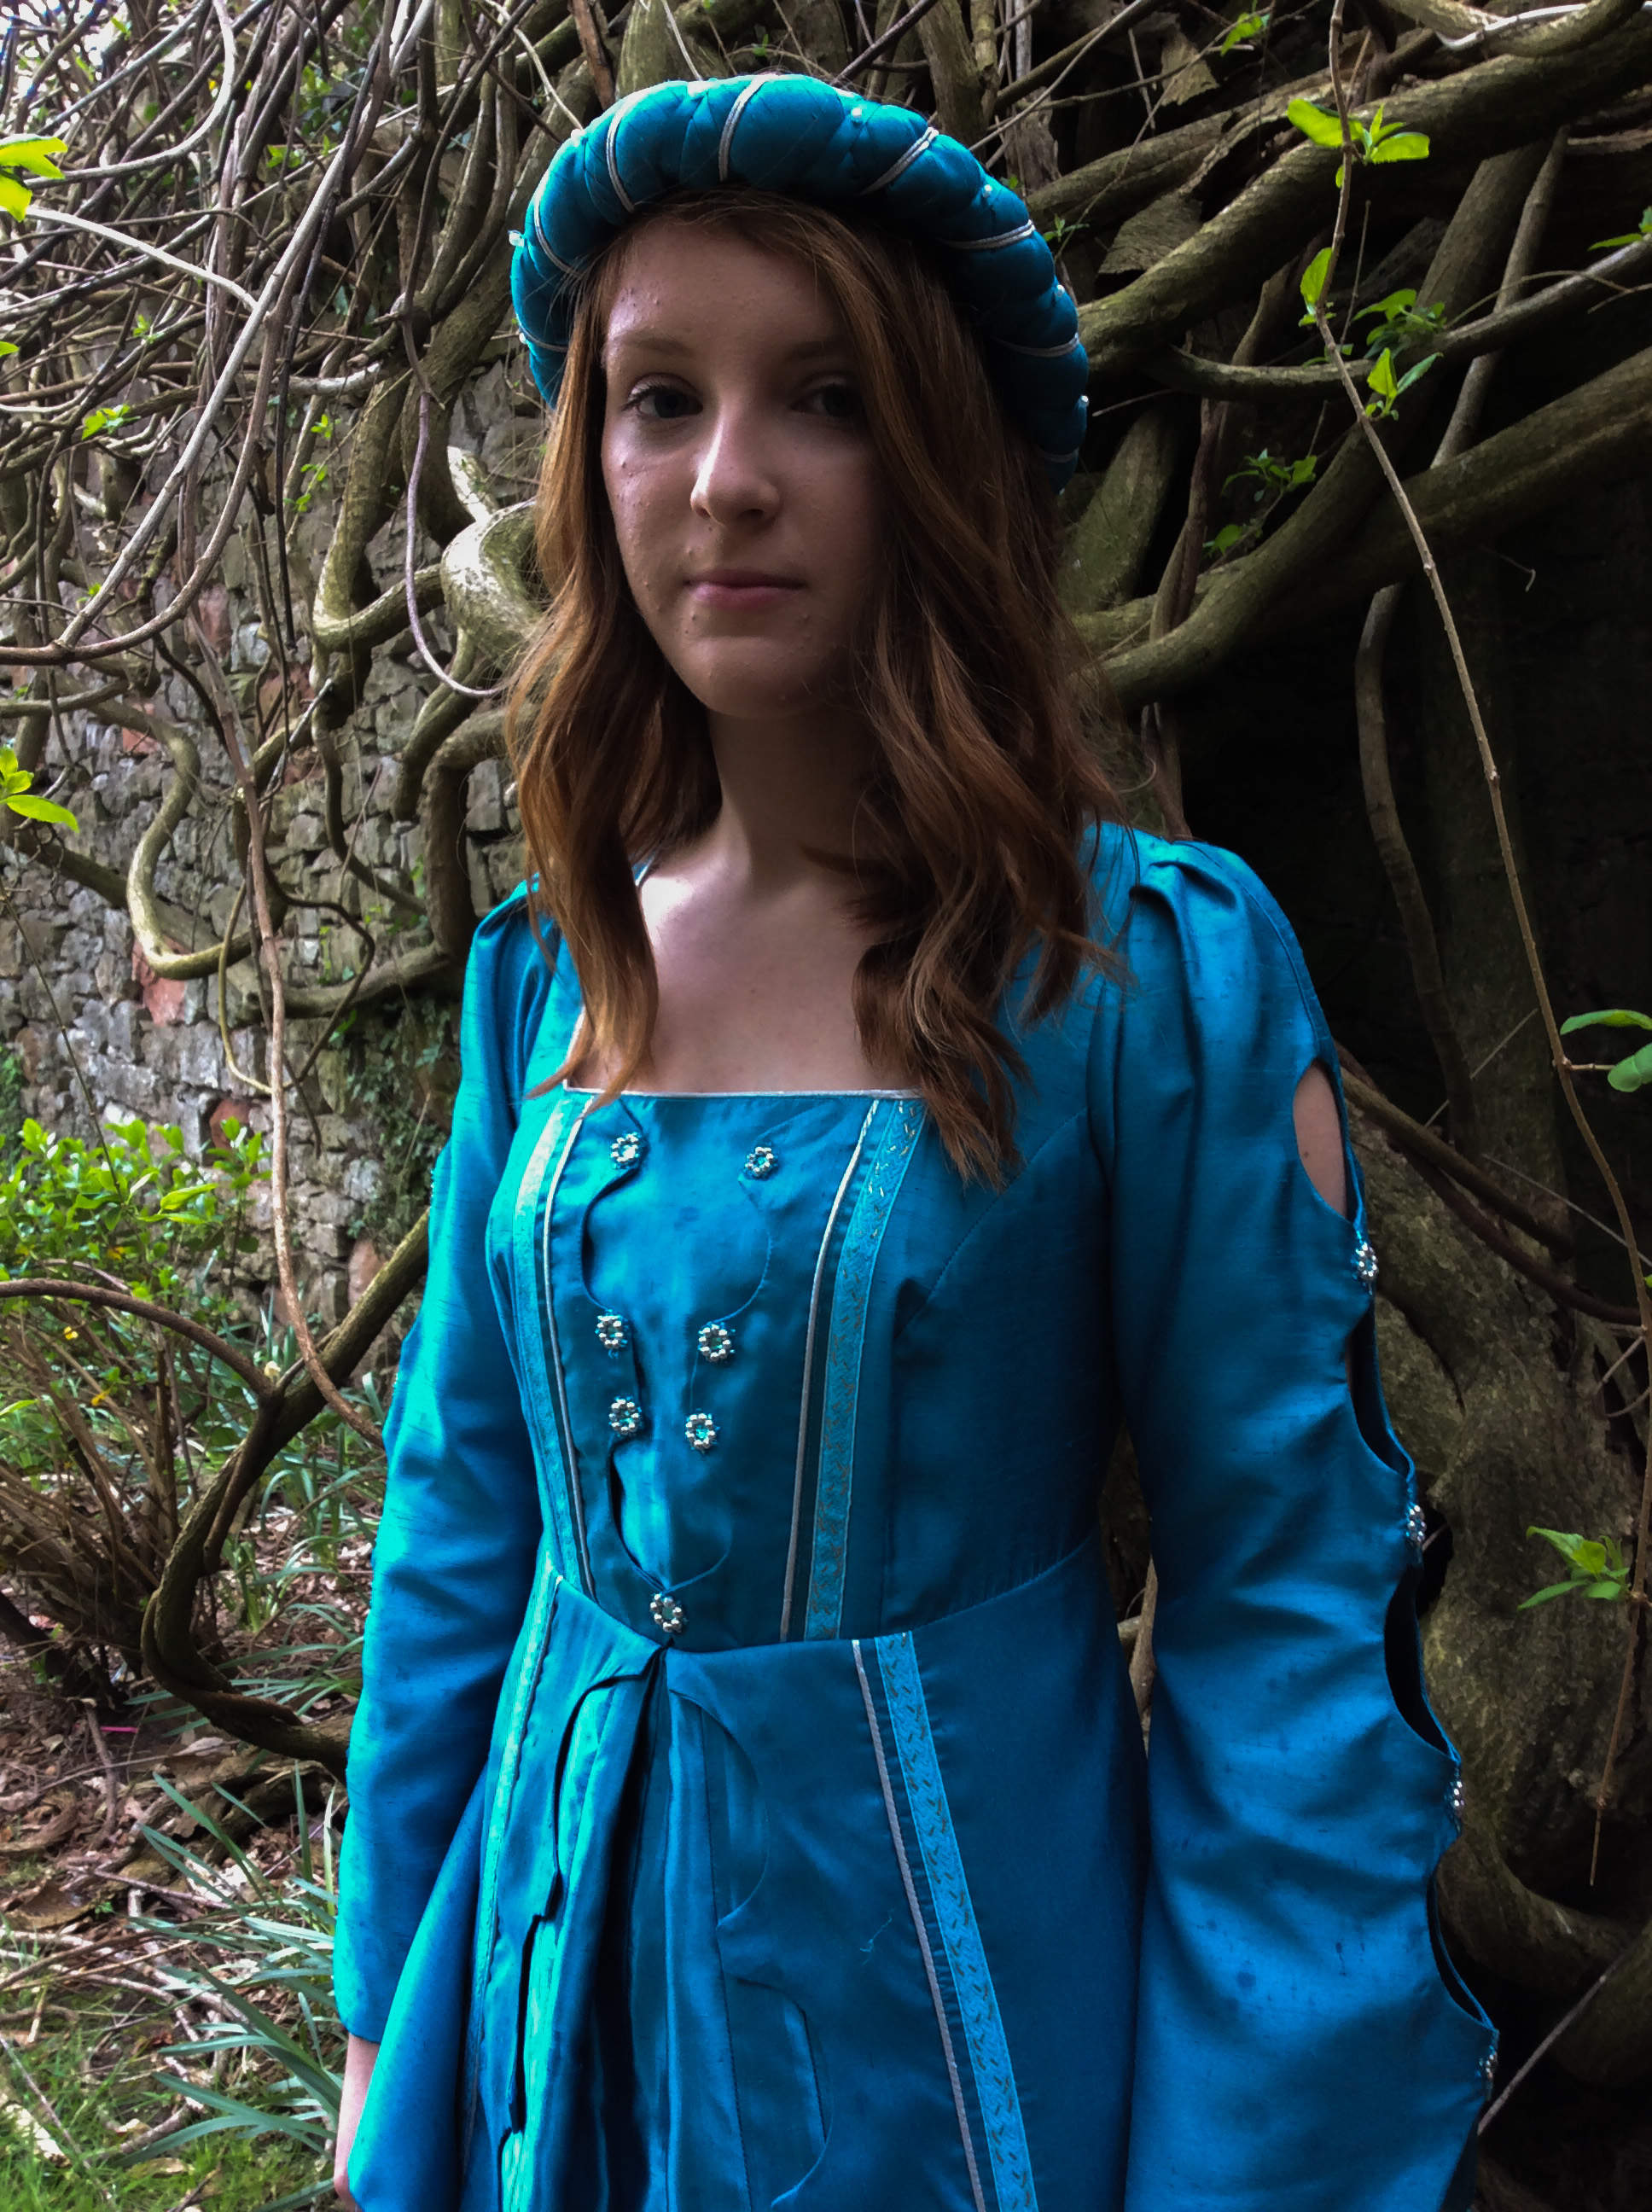 Turquoise medieval gown with square neckline